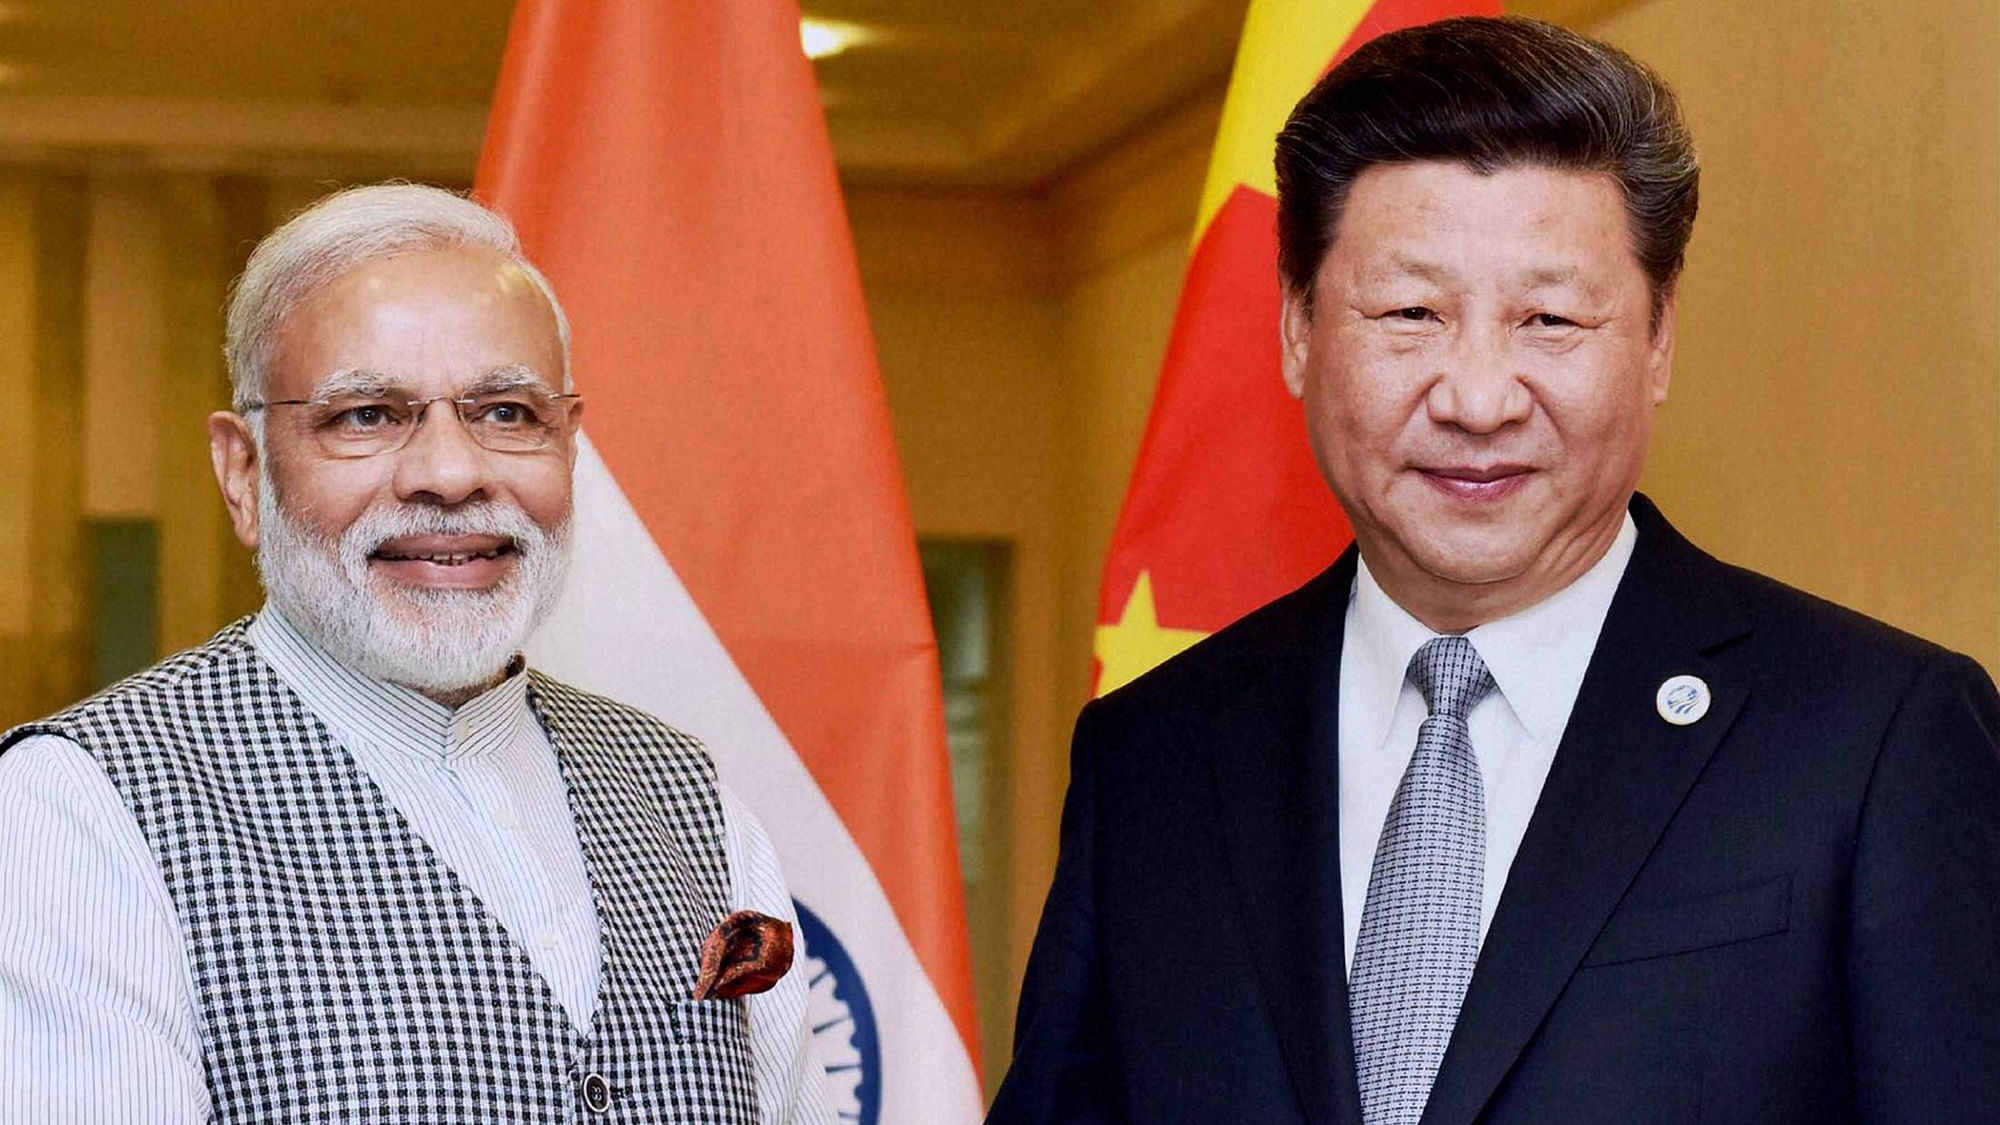 Prime Minister Narendra Modi with Chinese President Xi Jinping during a meeting in Tashkent on the sidelines of an earlier SCO Summit.